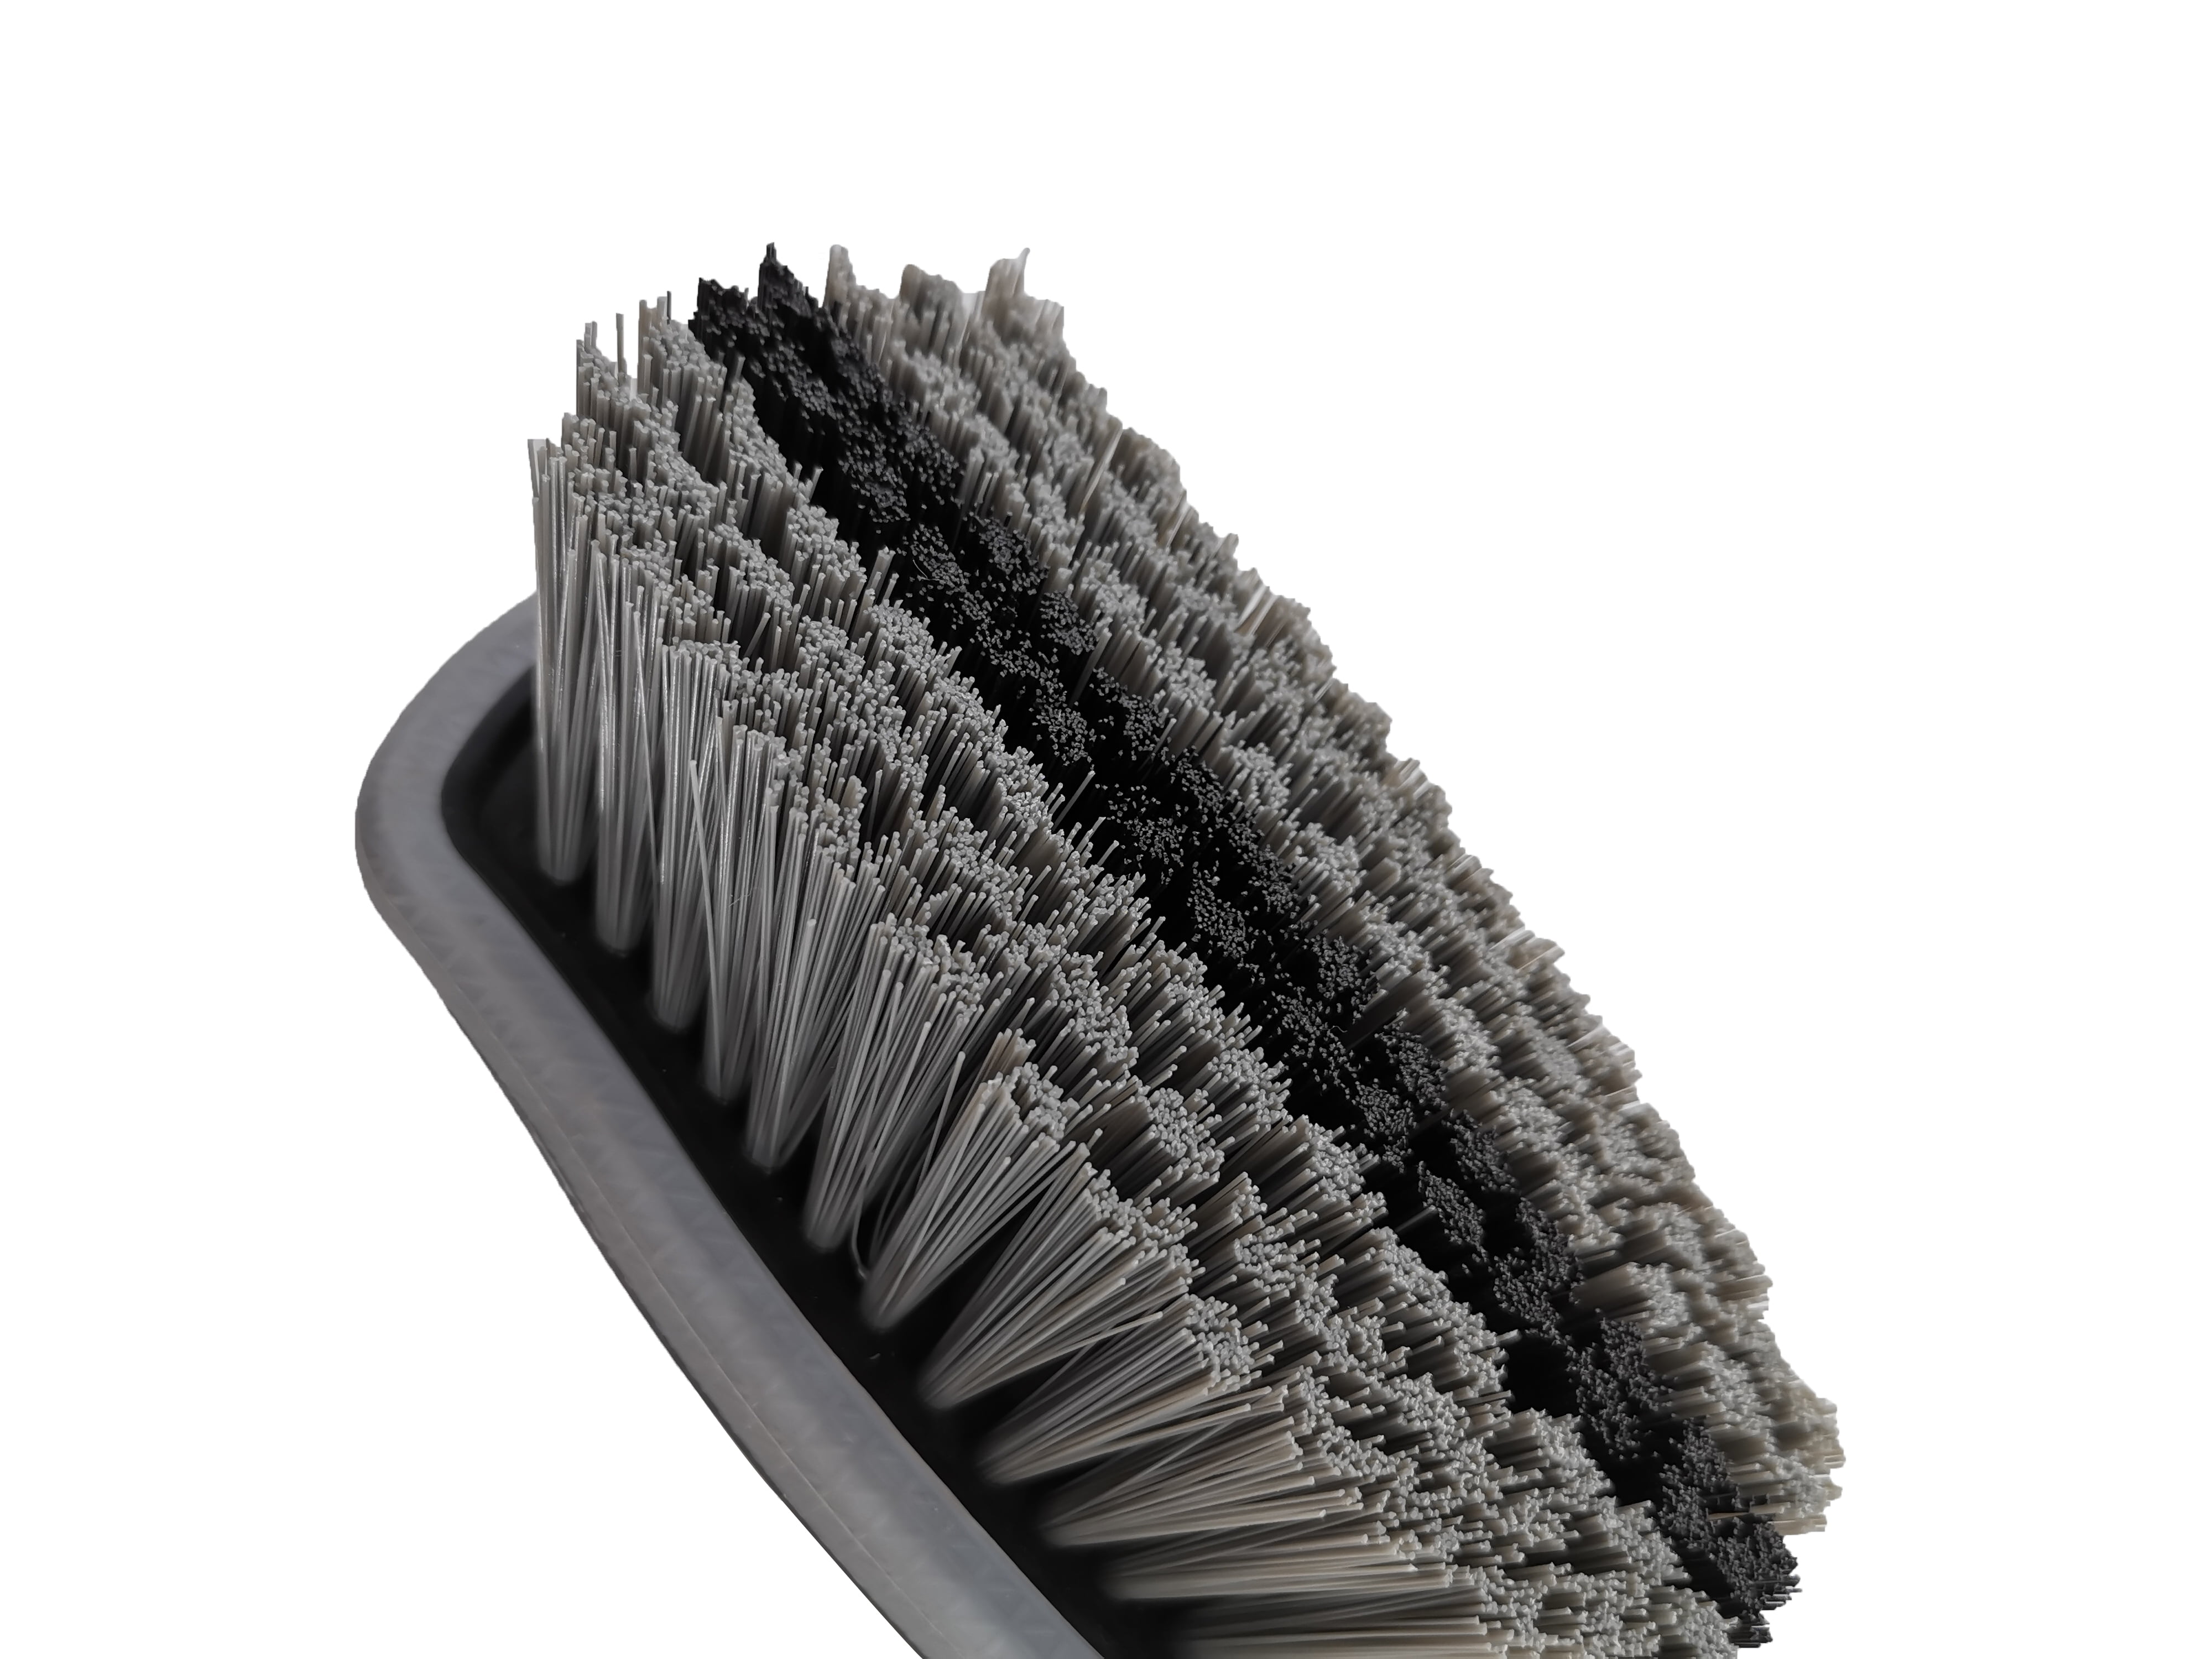 Auto Drive Carpet and Upholstery Brush, Grey, Size: 6 inch x 2.7 inch x 2.1 inch, Blue